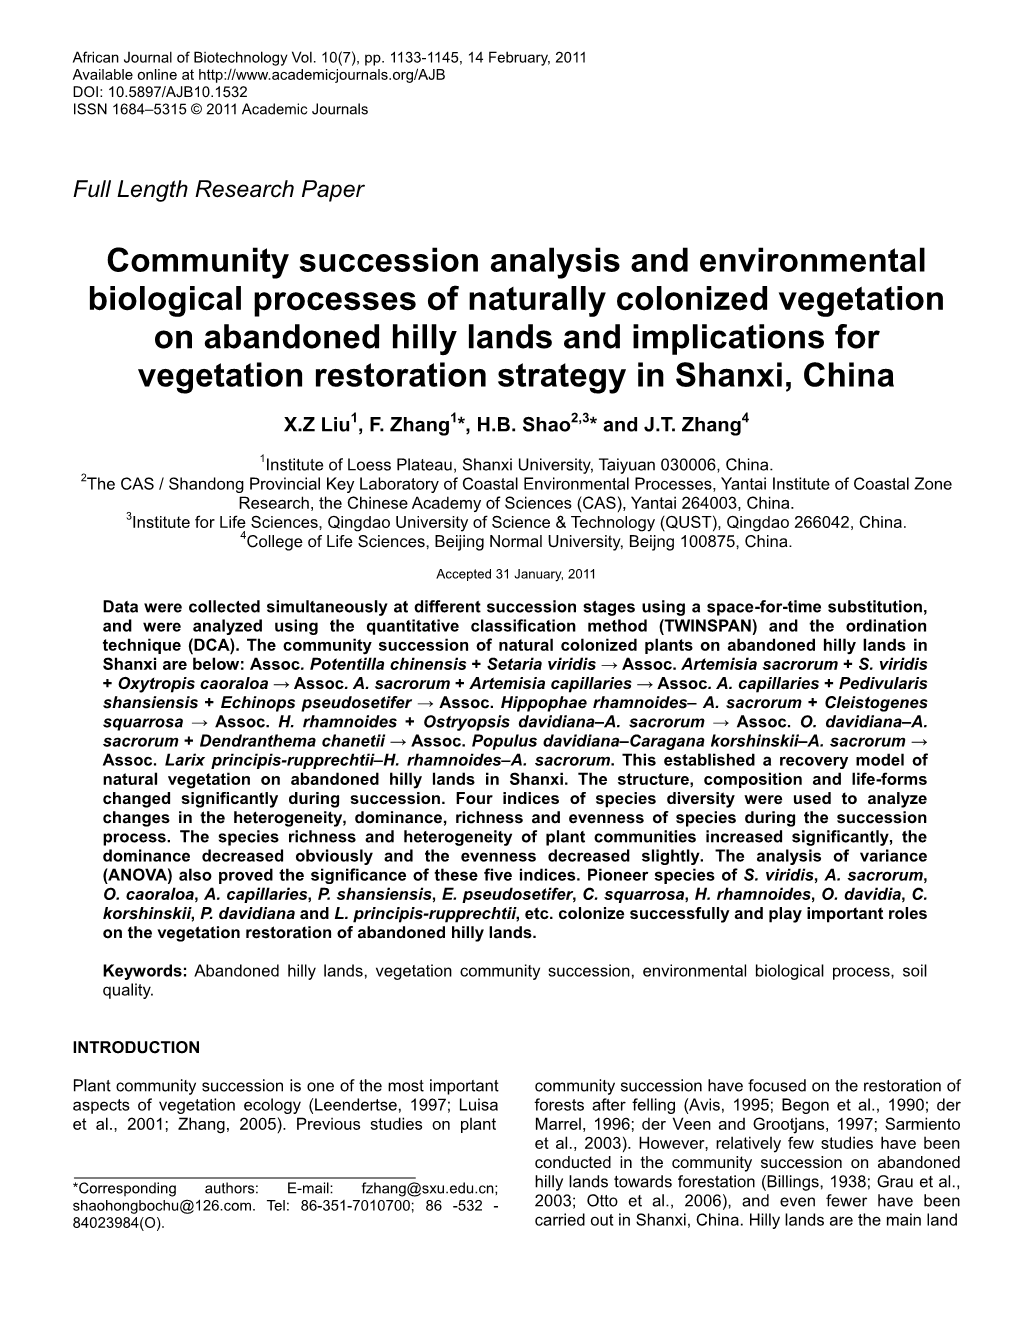 Community Succession Analysis and Environmental Biological Processes